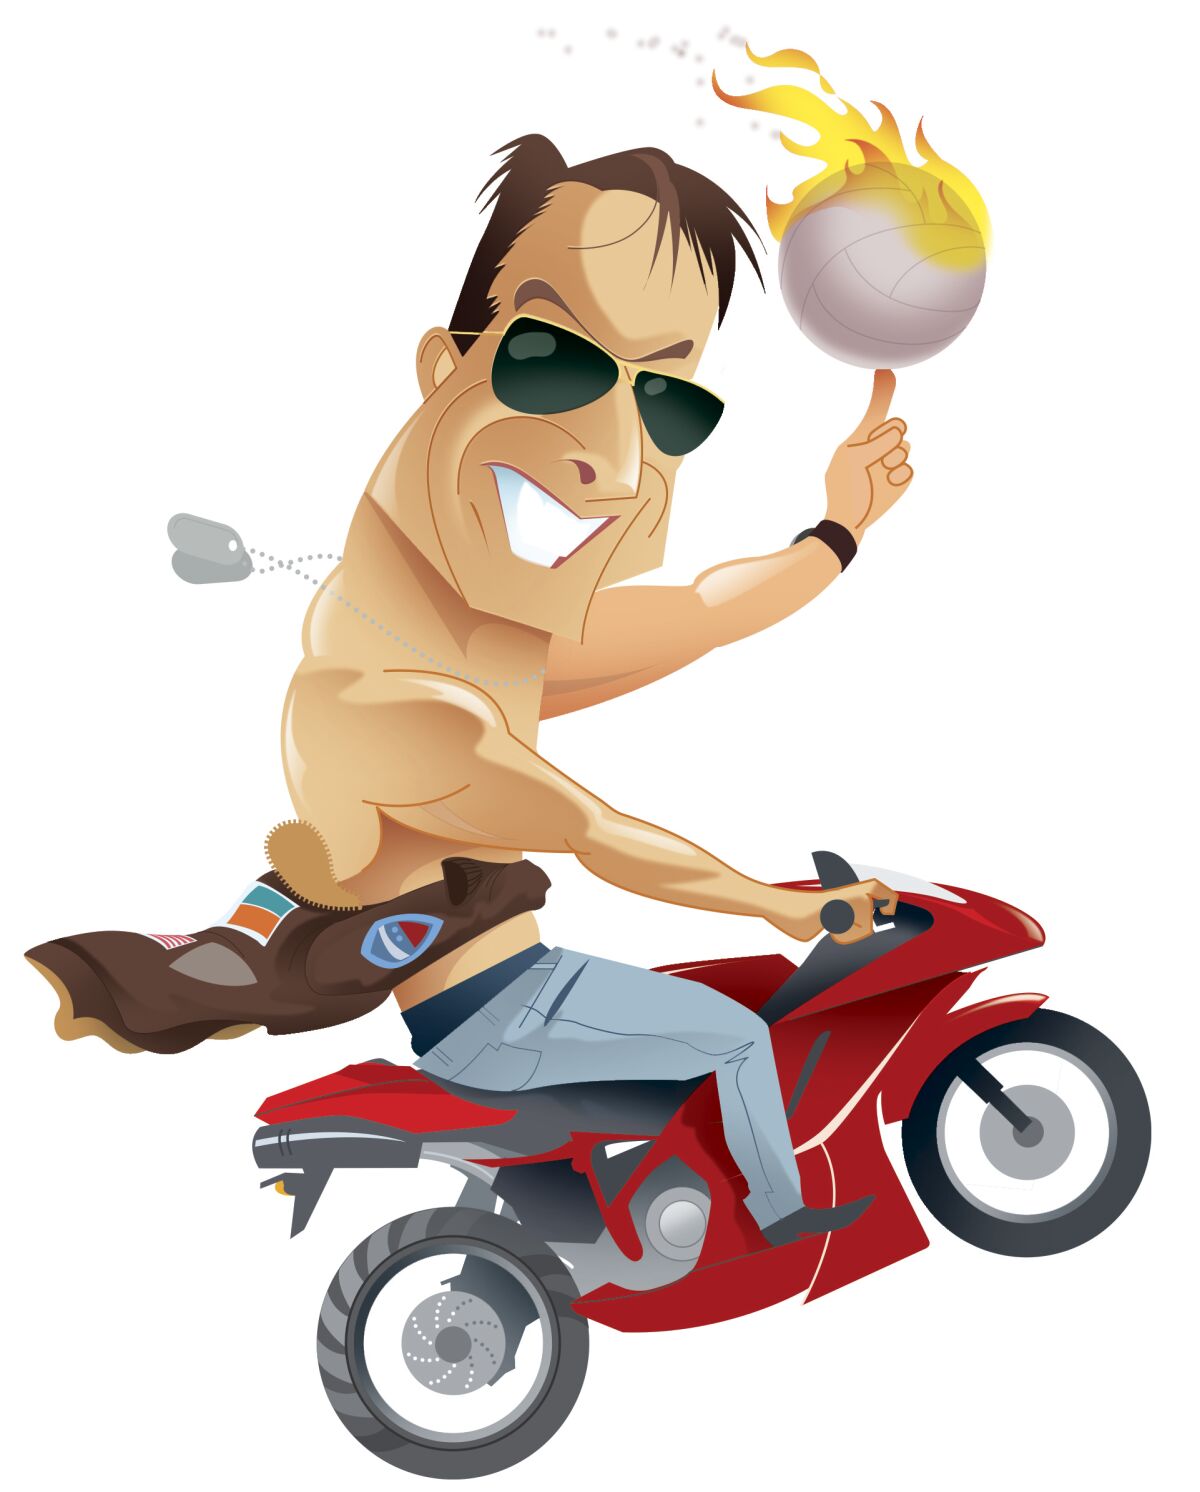 Illustration of Tom Cruise popping a wheelie on a motorcycle.